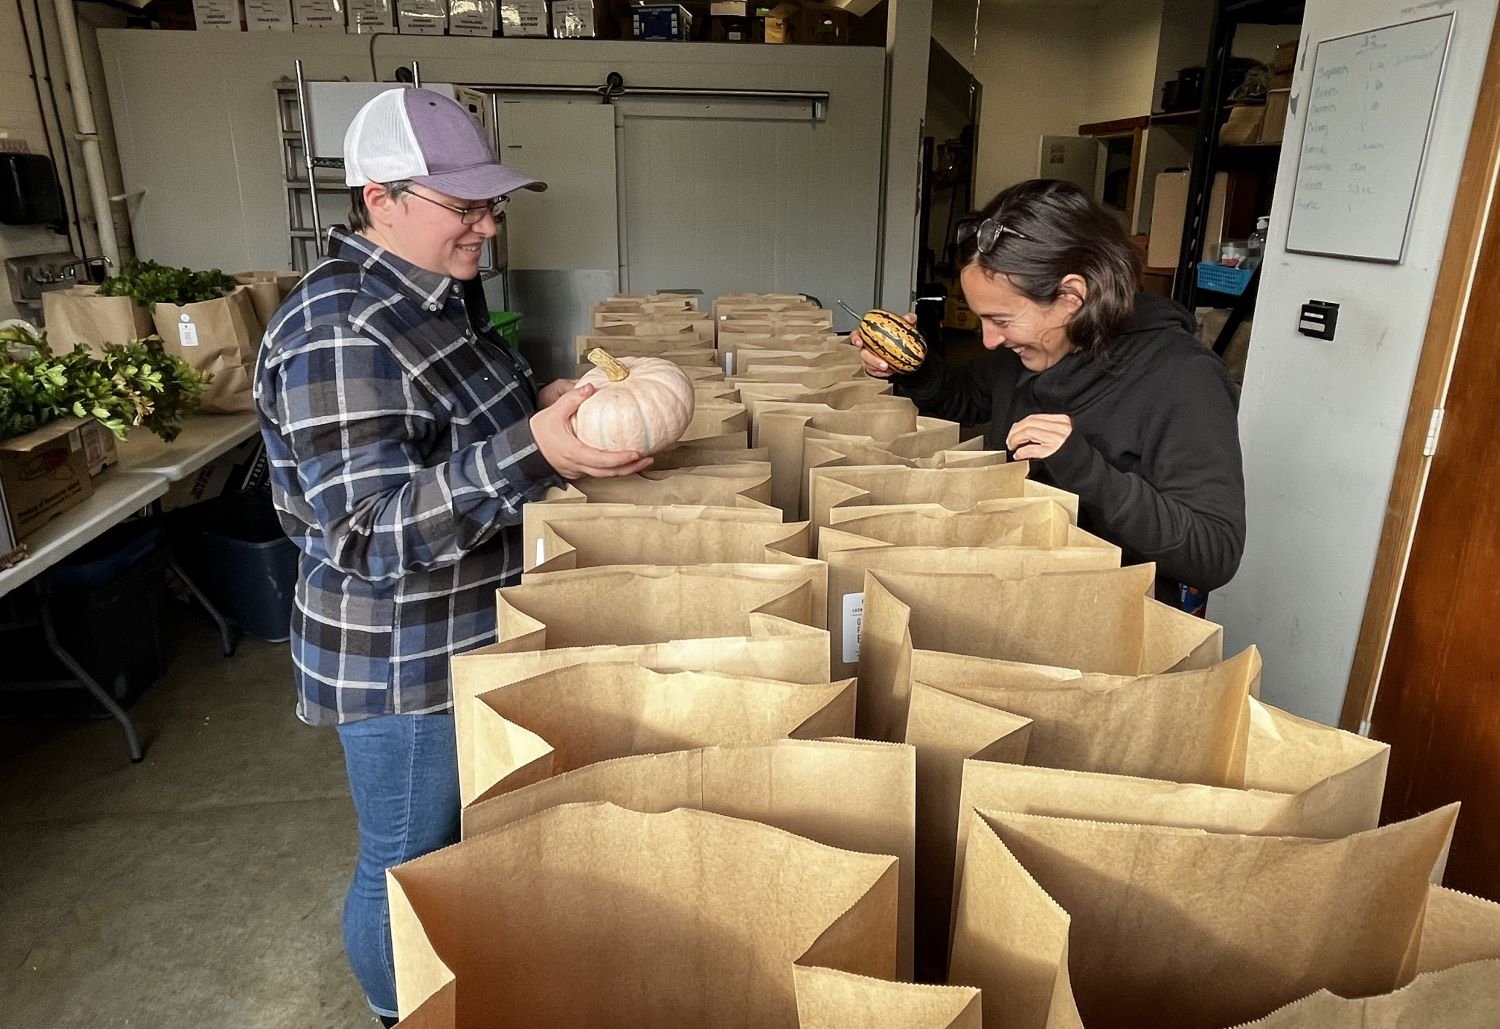 Two people stand on either side of a long table covered in brown paper shopping bags. They are adding squash to the bags. One wears a ball cap and greyish plaid shirt; the other a black jacket.